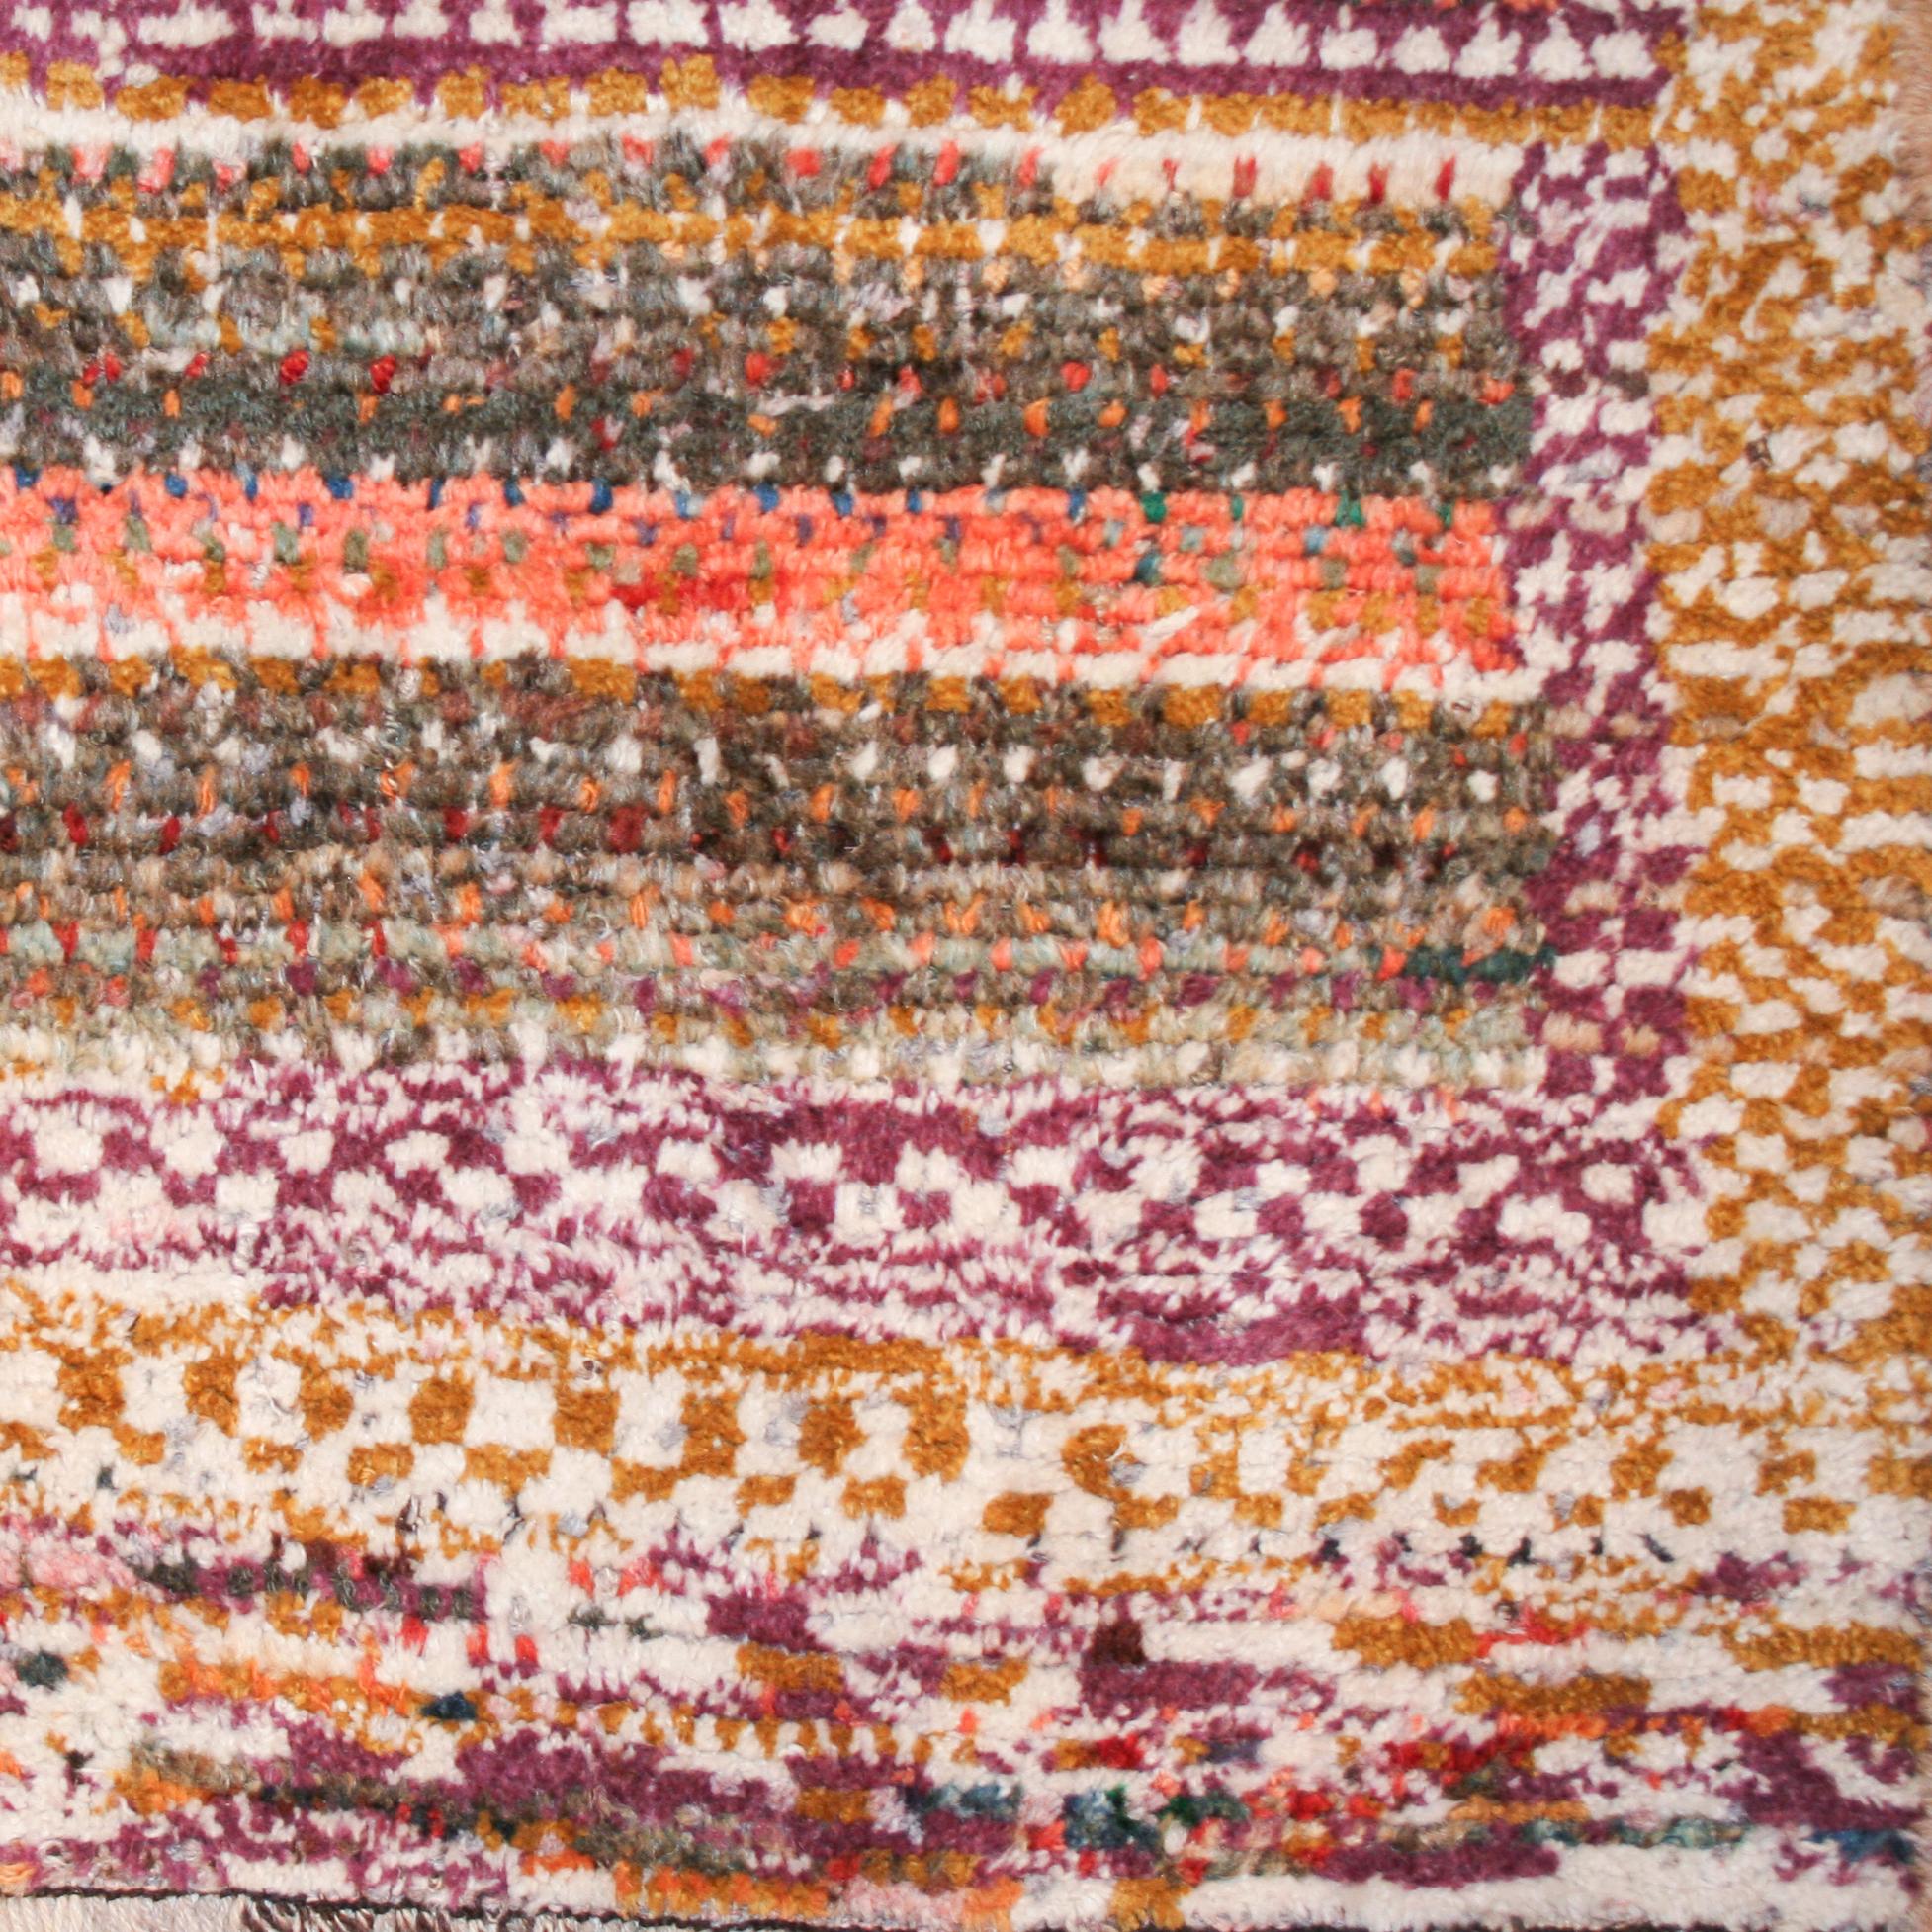 Tulu rugs represent one of the earliest forms of nomadic pile weaving, typically knotted with a medium-high pile as they were meant as bedding rugs for the tent. The patterns are quite simple, ranging from completely open fields to stacked niches,